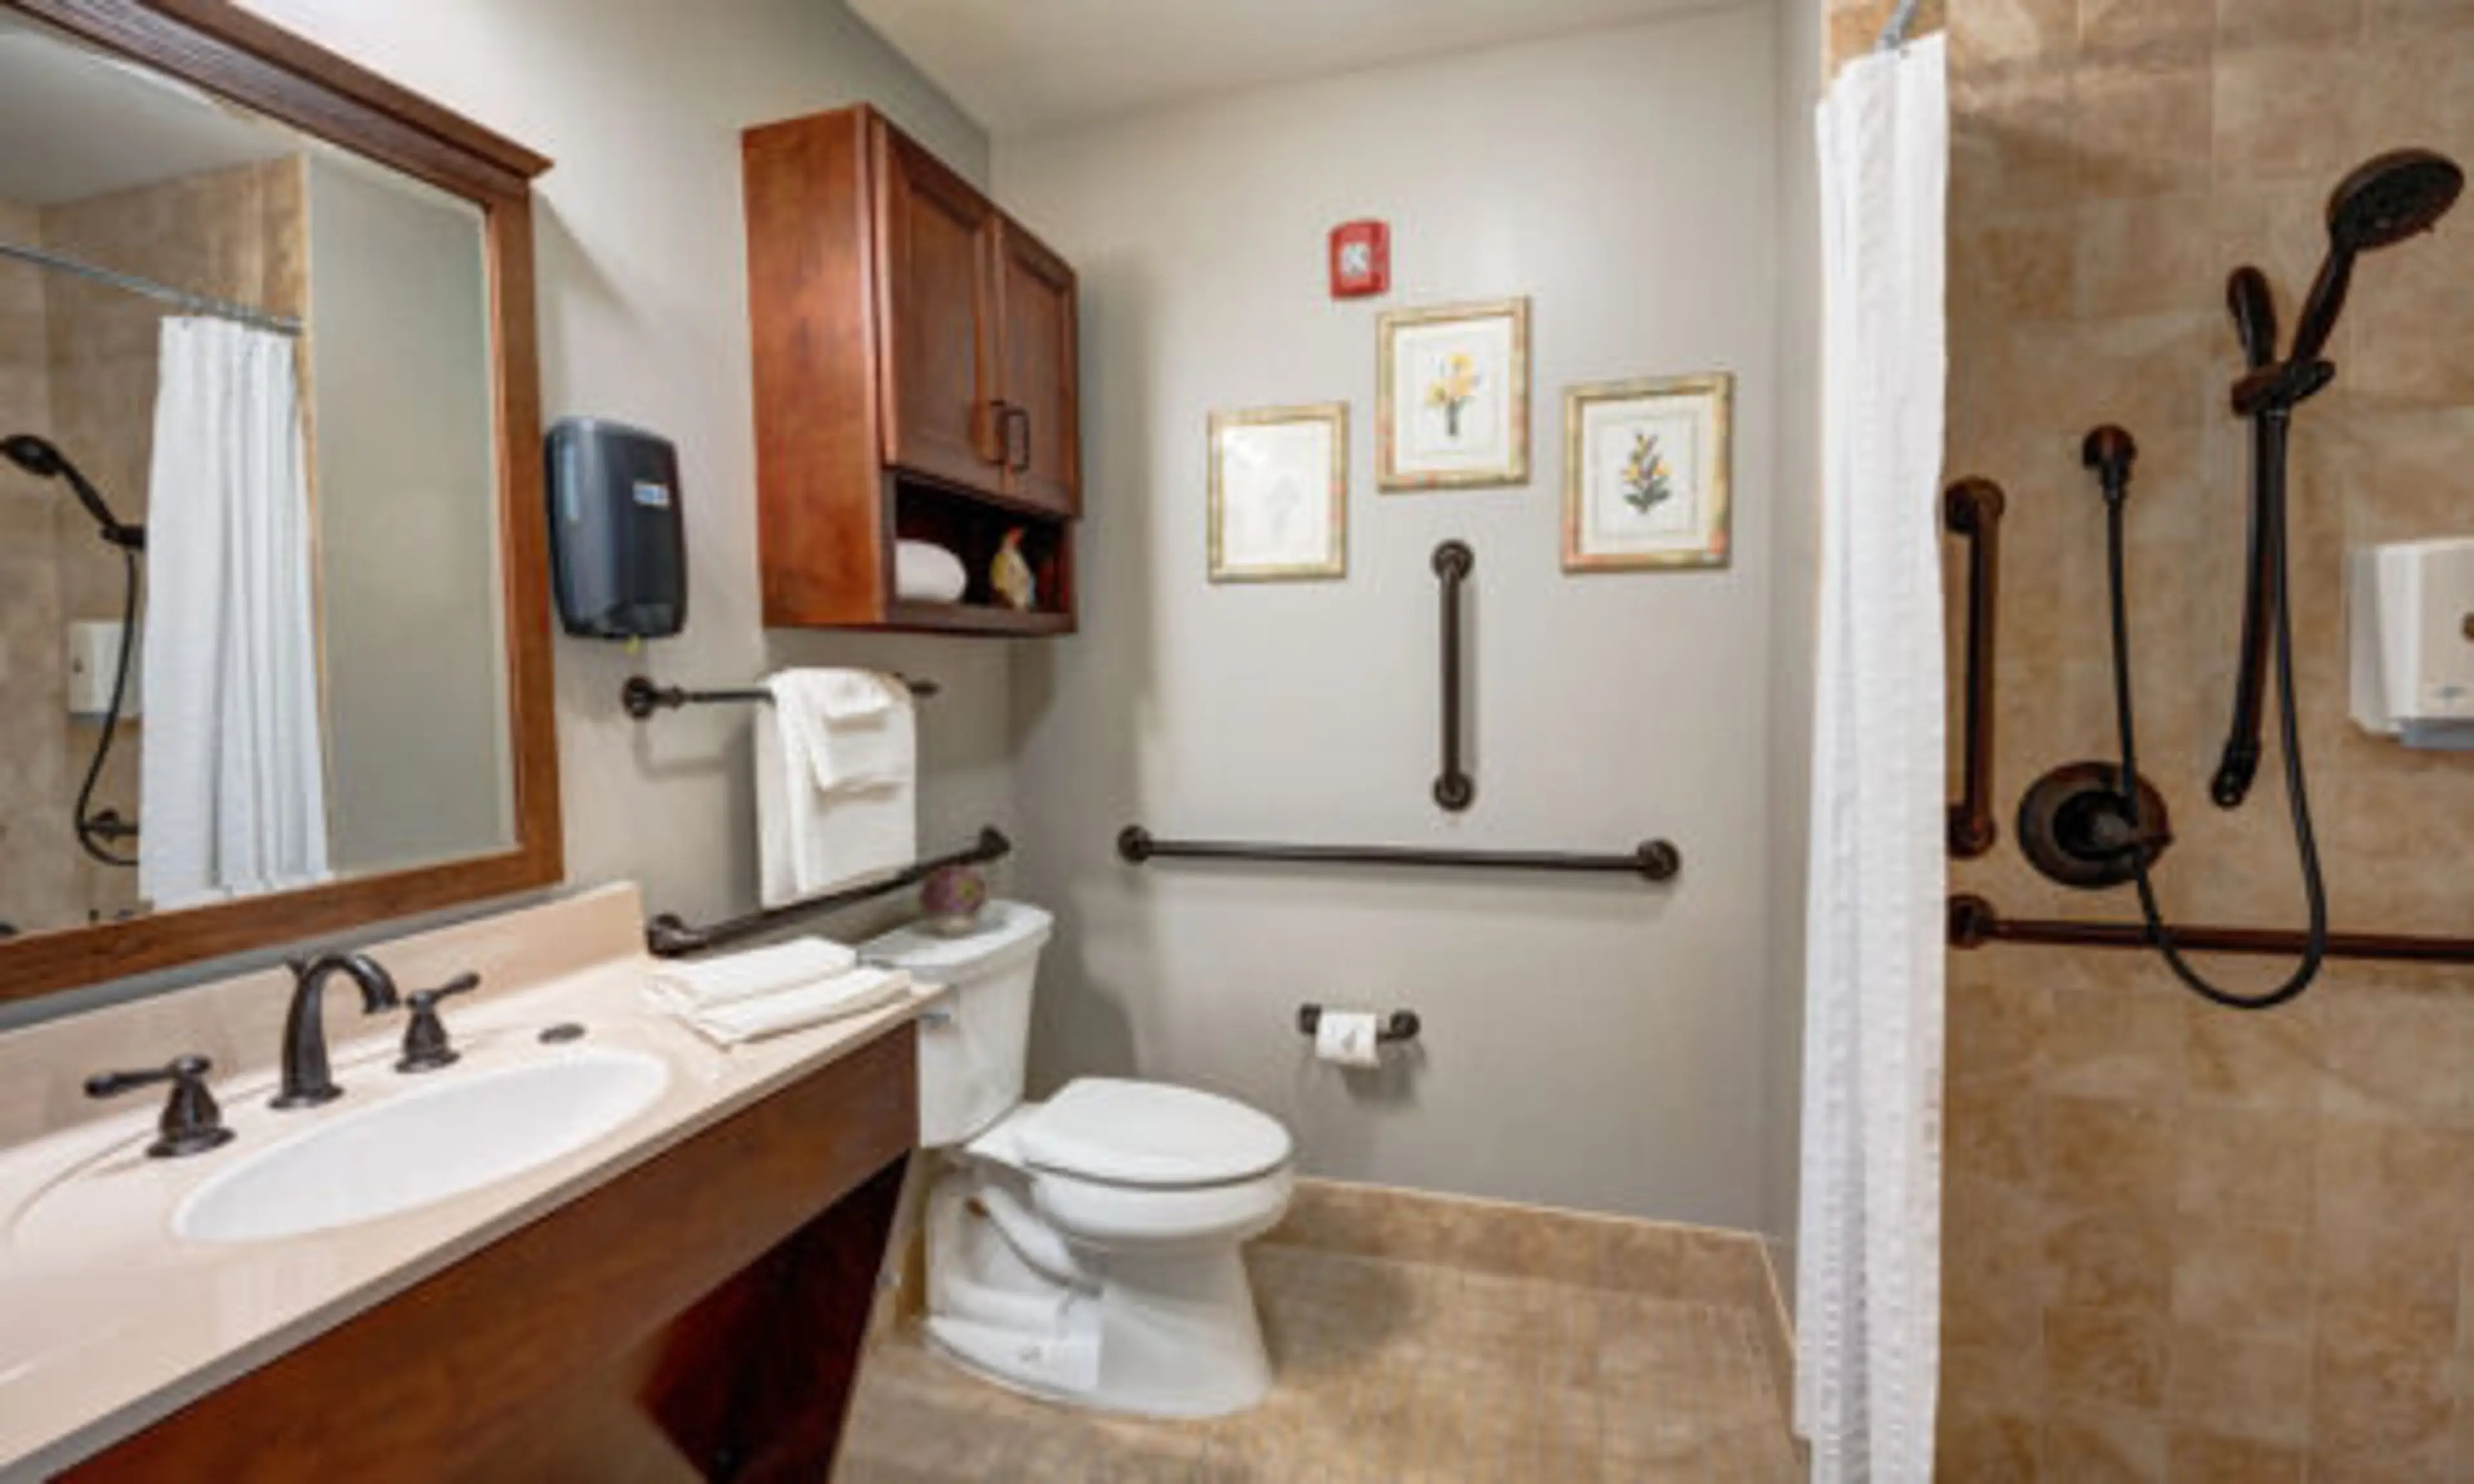 The Auberge at Naperville Suite Bathroom